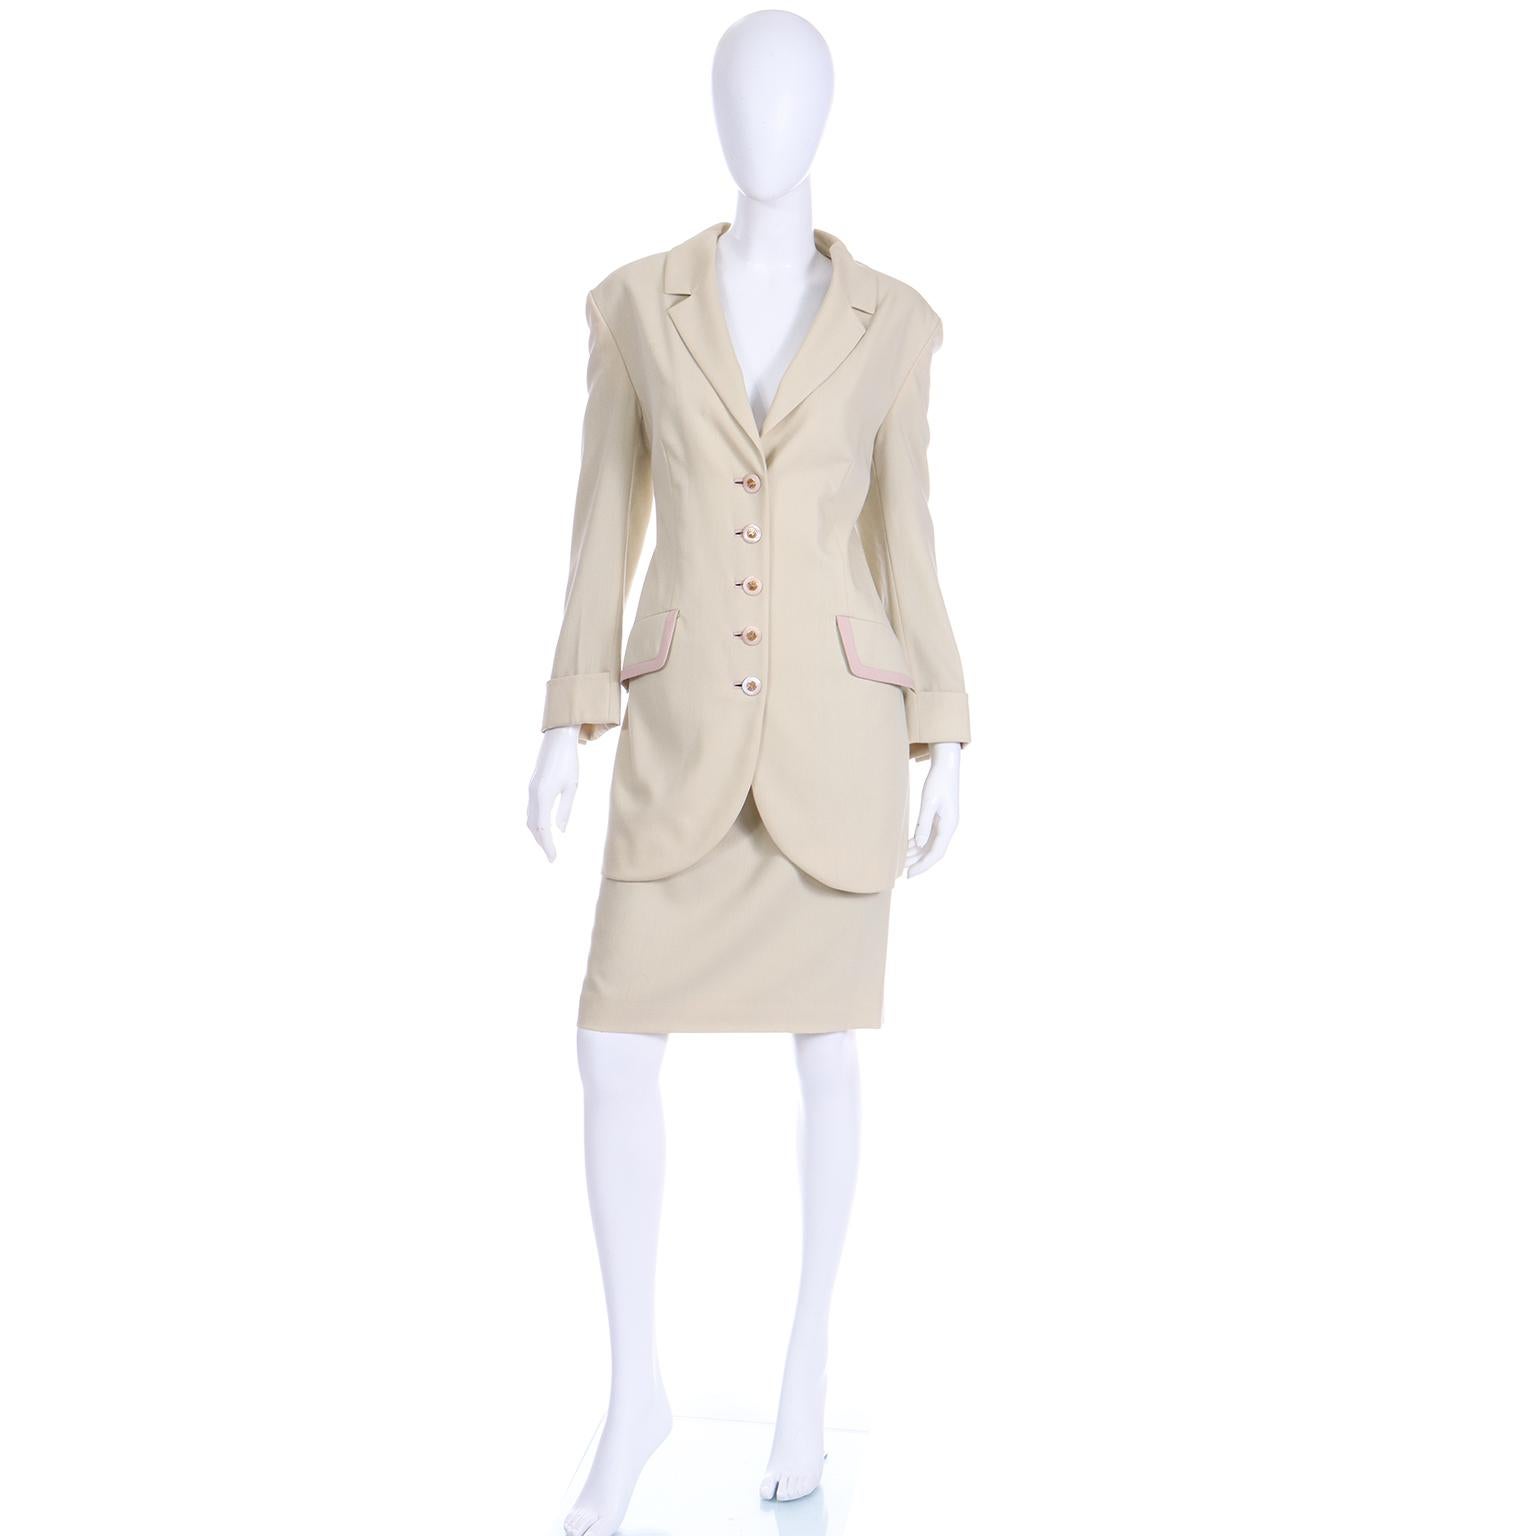 This is such a contemporary looking vintage Louis Feraud pale neutral beige skirt and long jacket suit with light rose pink trim. The shade of beige has hints of green and yellow undertones, making it perfect to wear in the spring/summer.

The